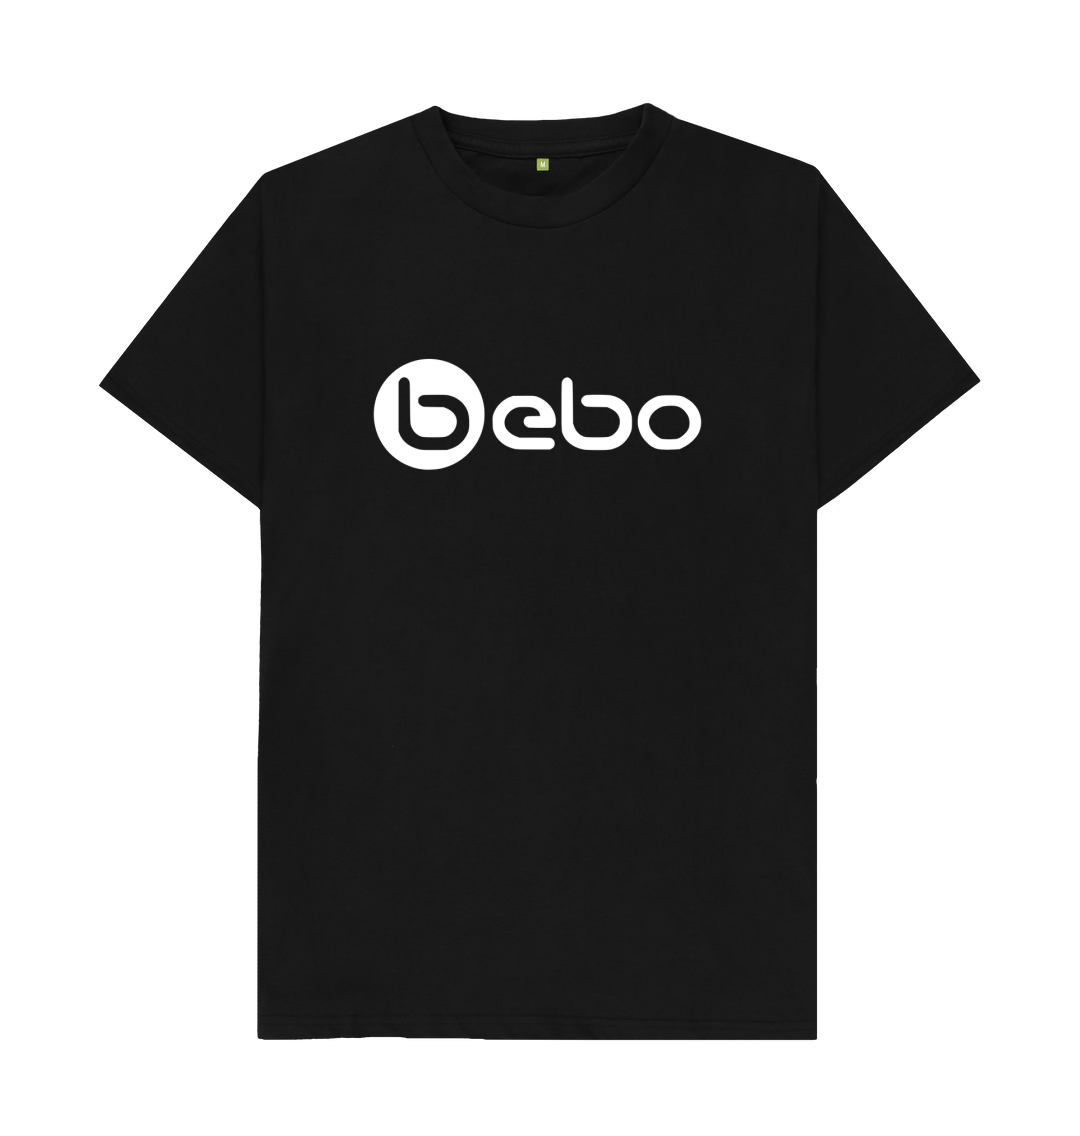 (The logo of the two-time defunct social media company Bebo.)